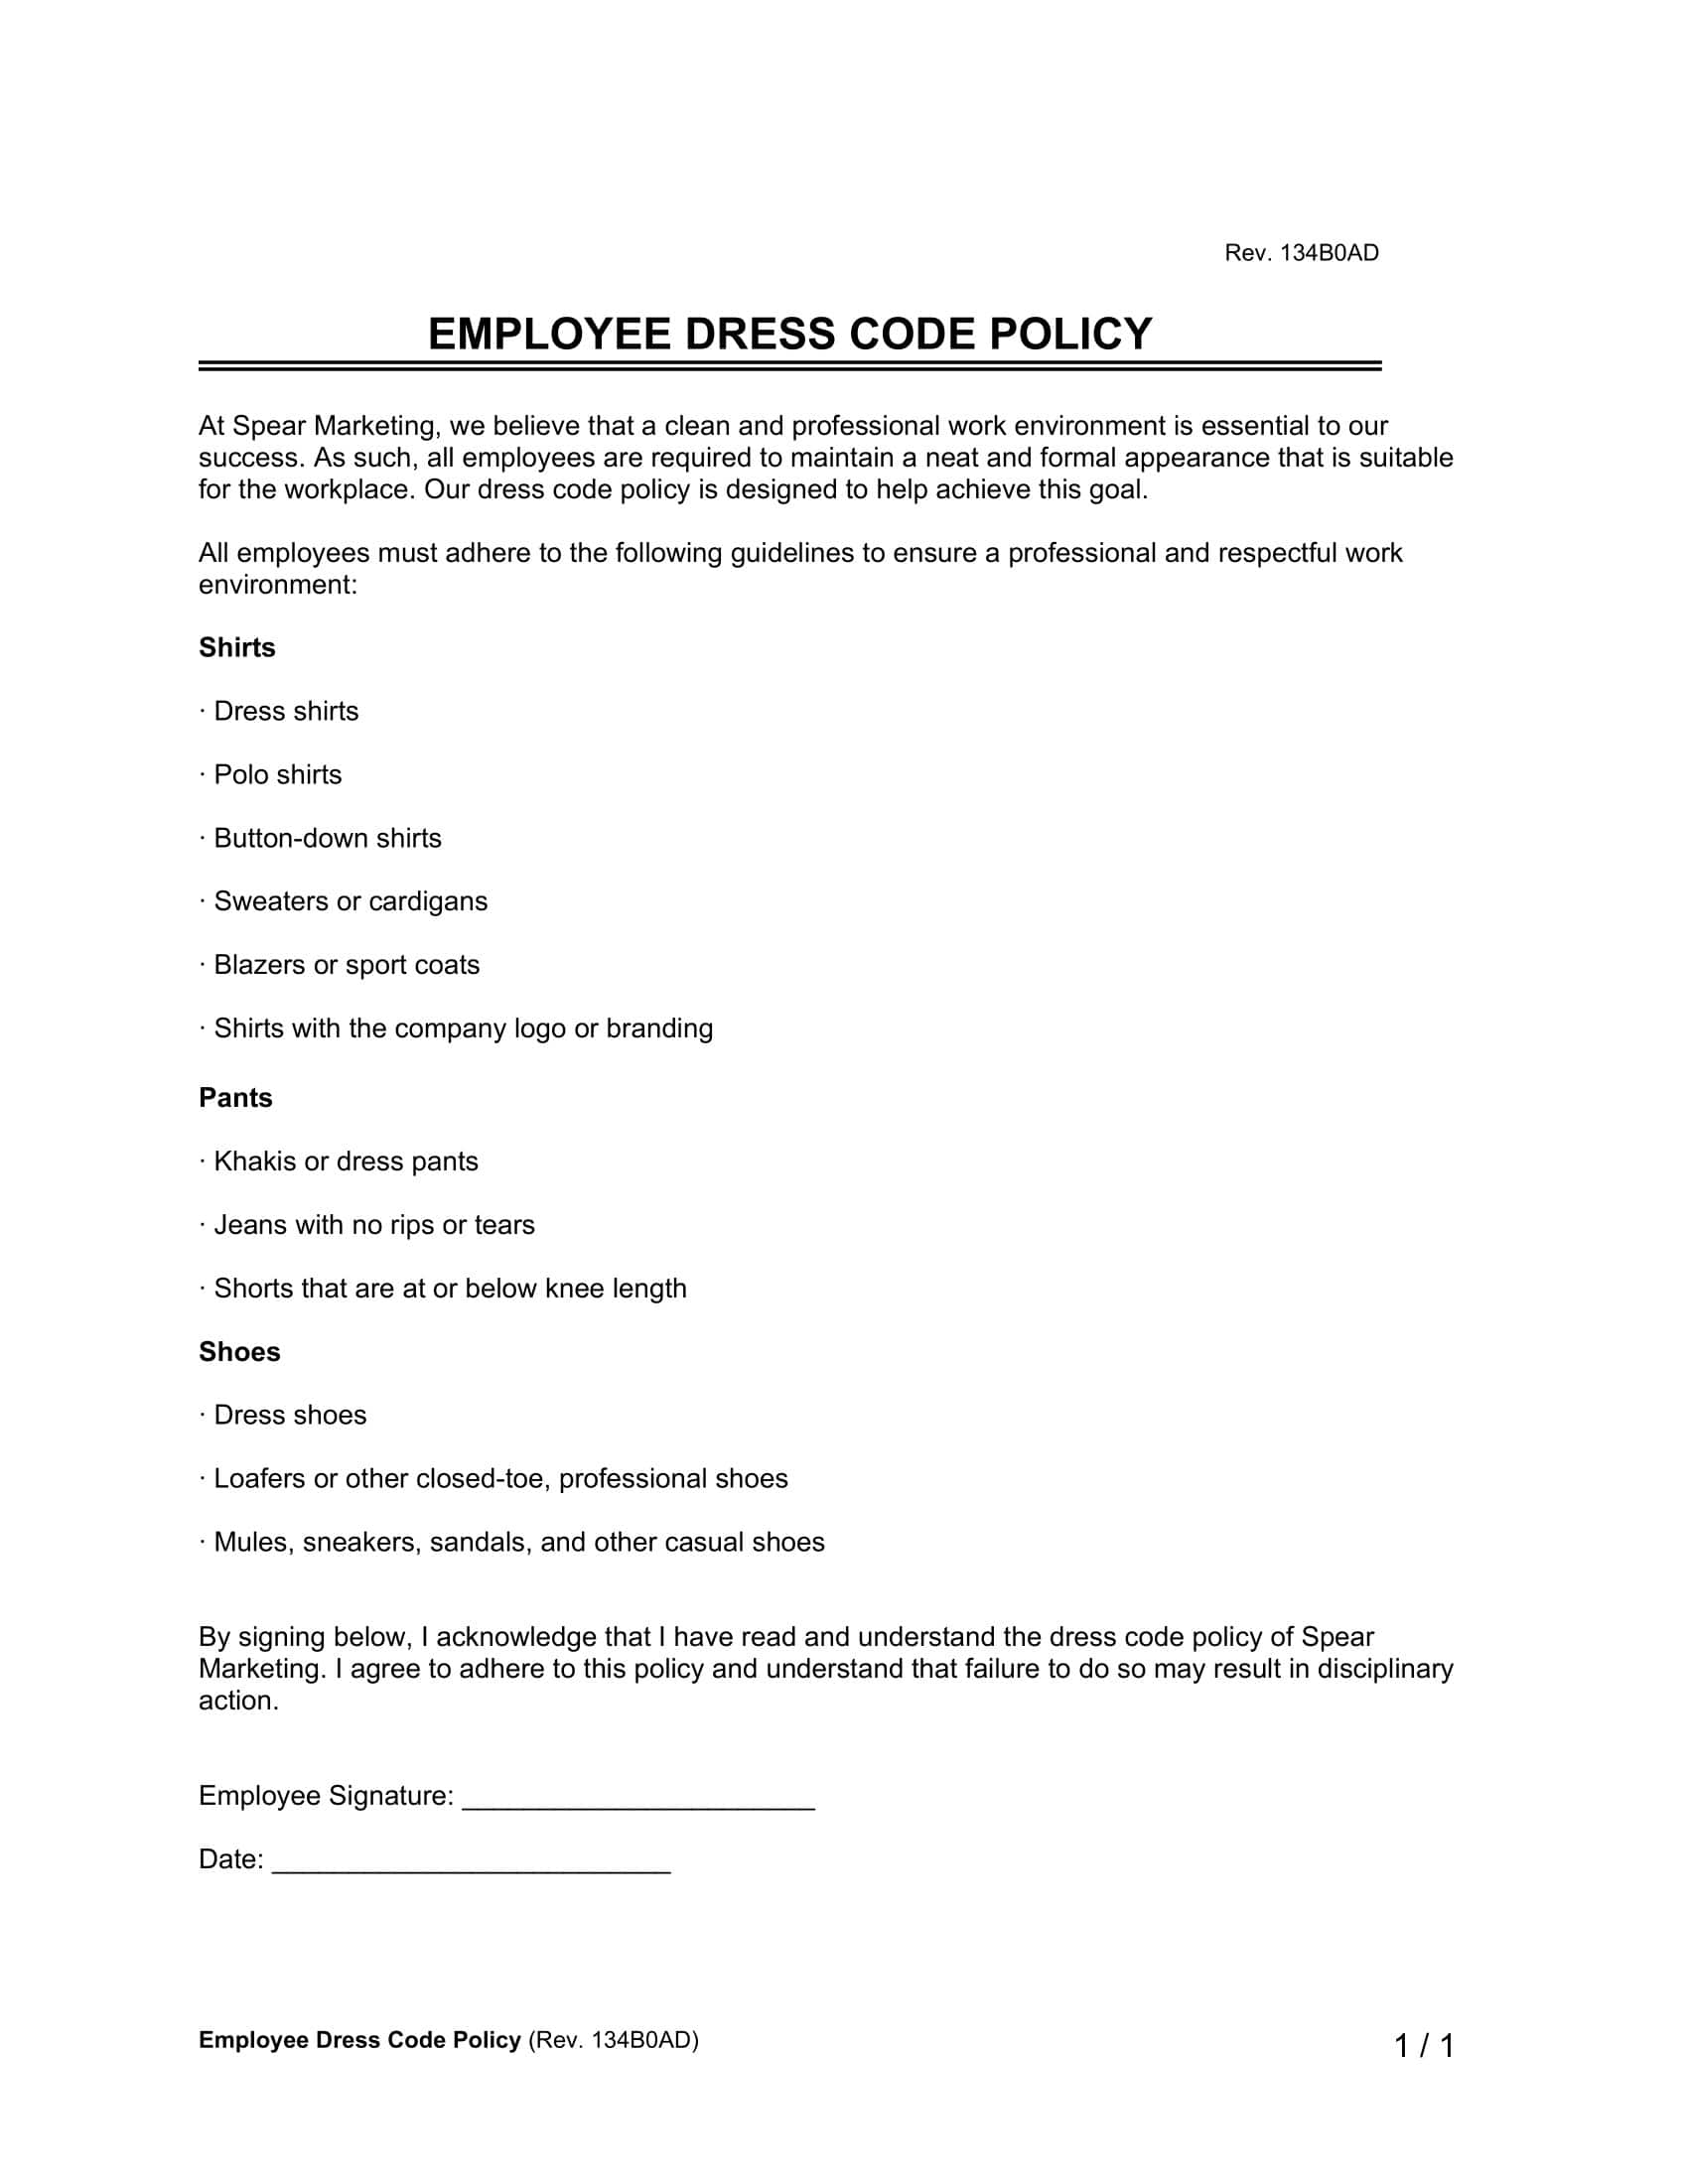 Employee Dress Code Policy example